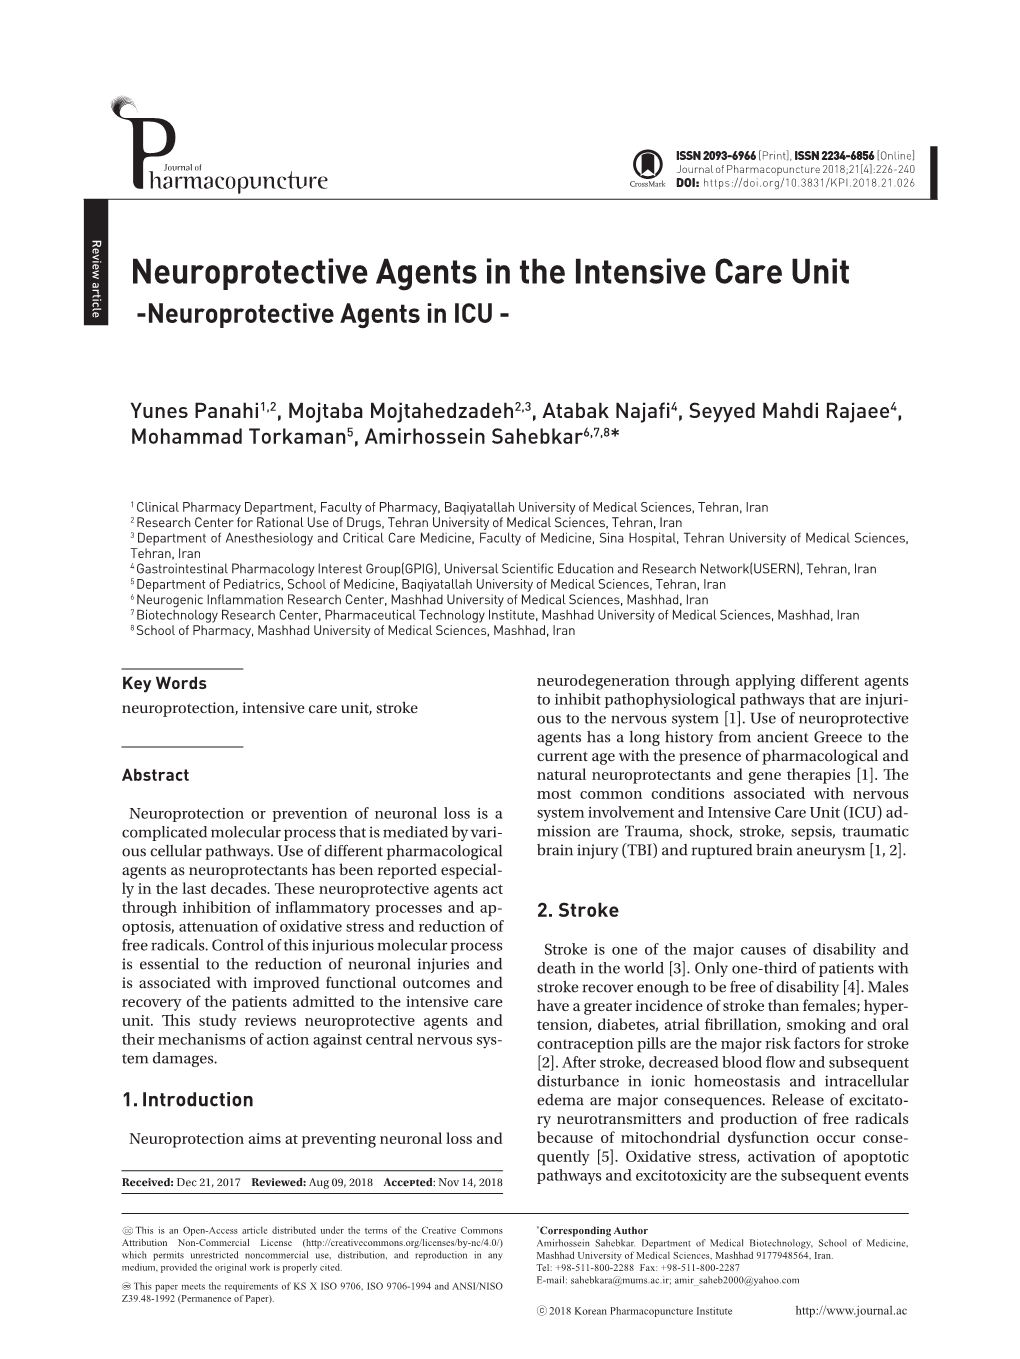 Neuroprotective Agents in the Intensive Care Unit -Neuroprotective Agents in ICU